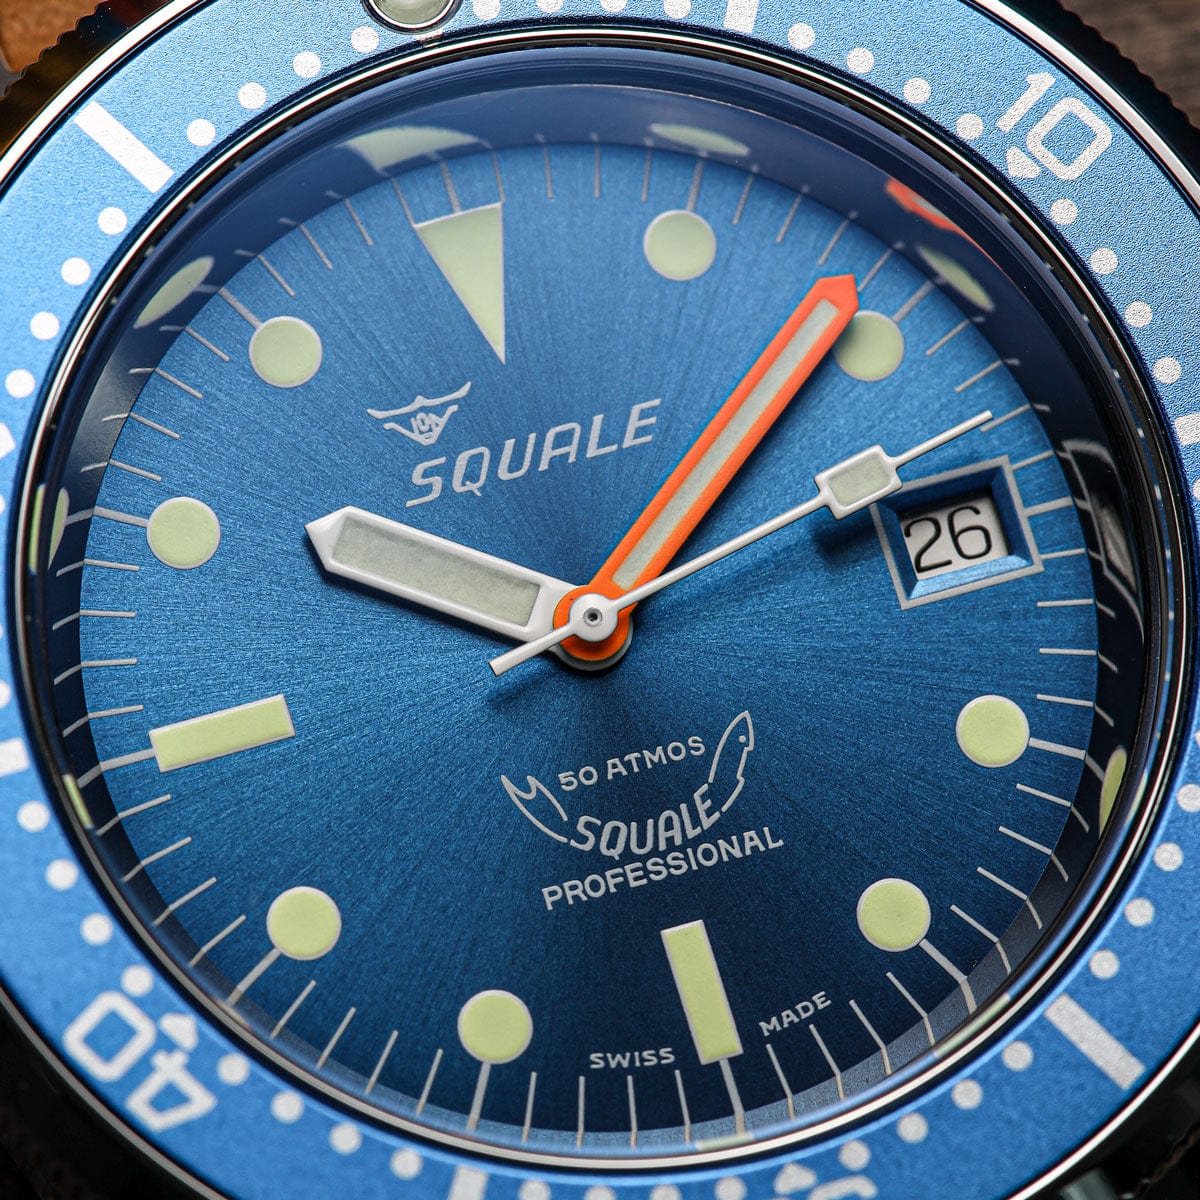 Squale 1521 Swiss Made Divers Watch, Ocean Blue Polished Case - Mesh